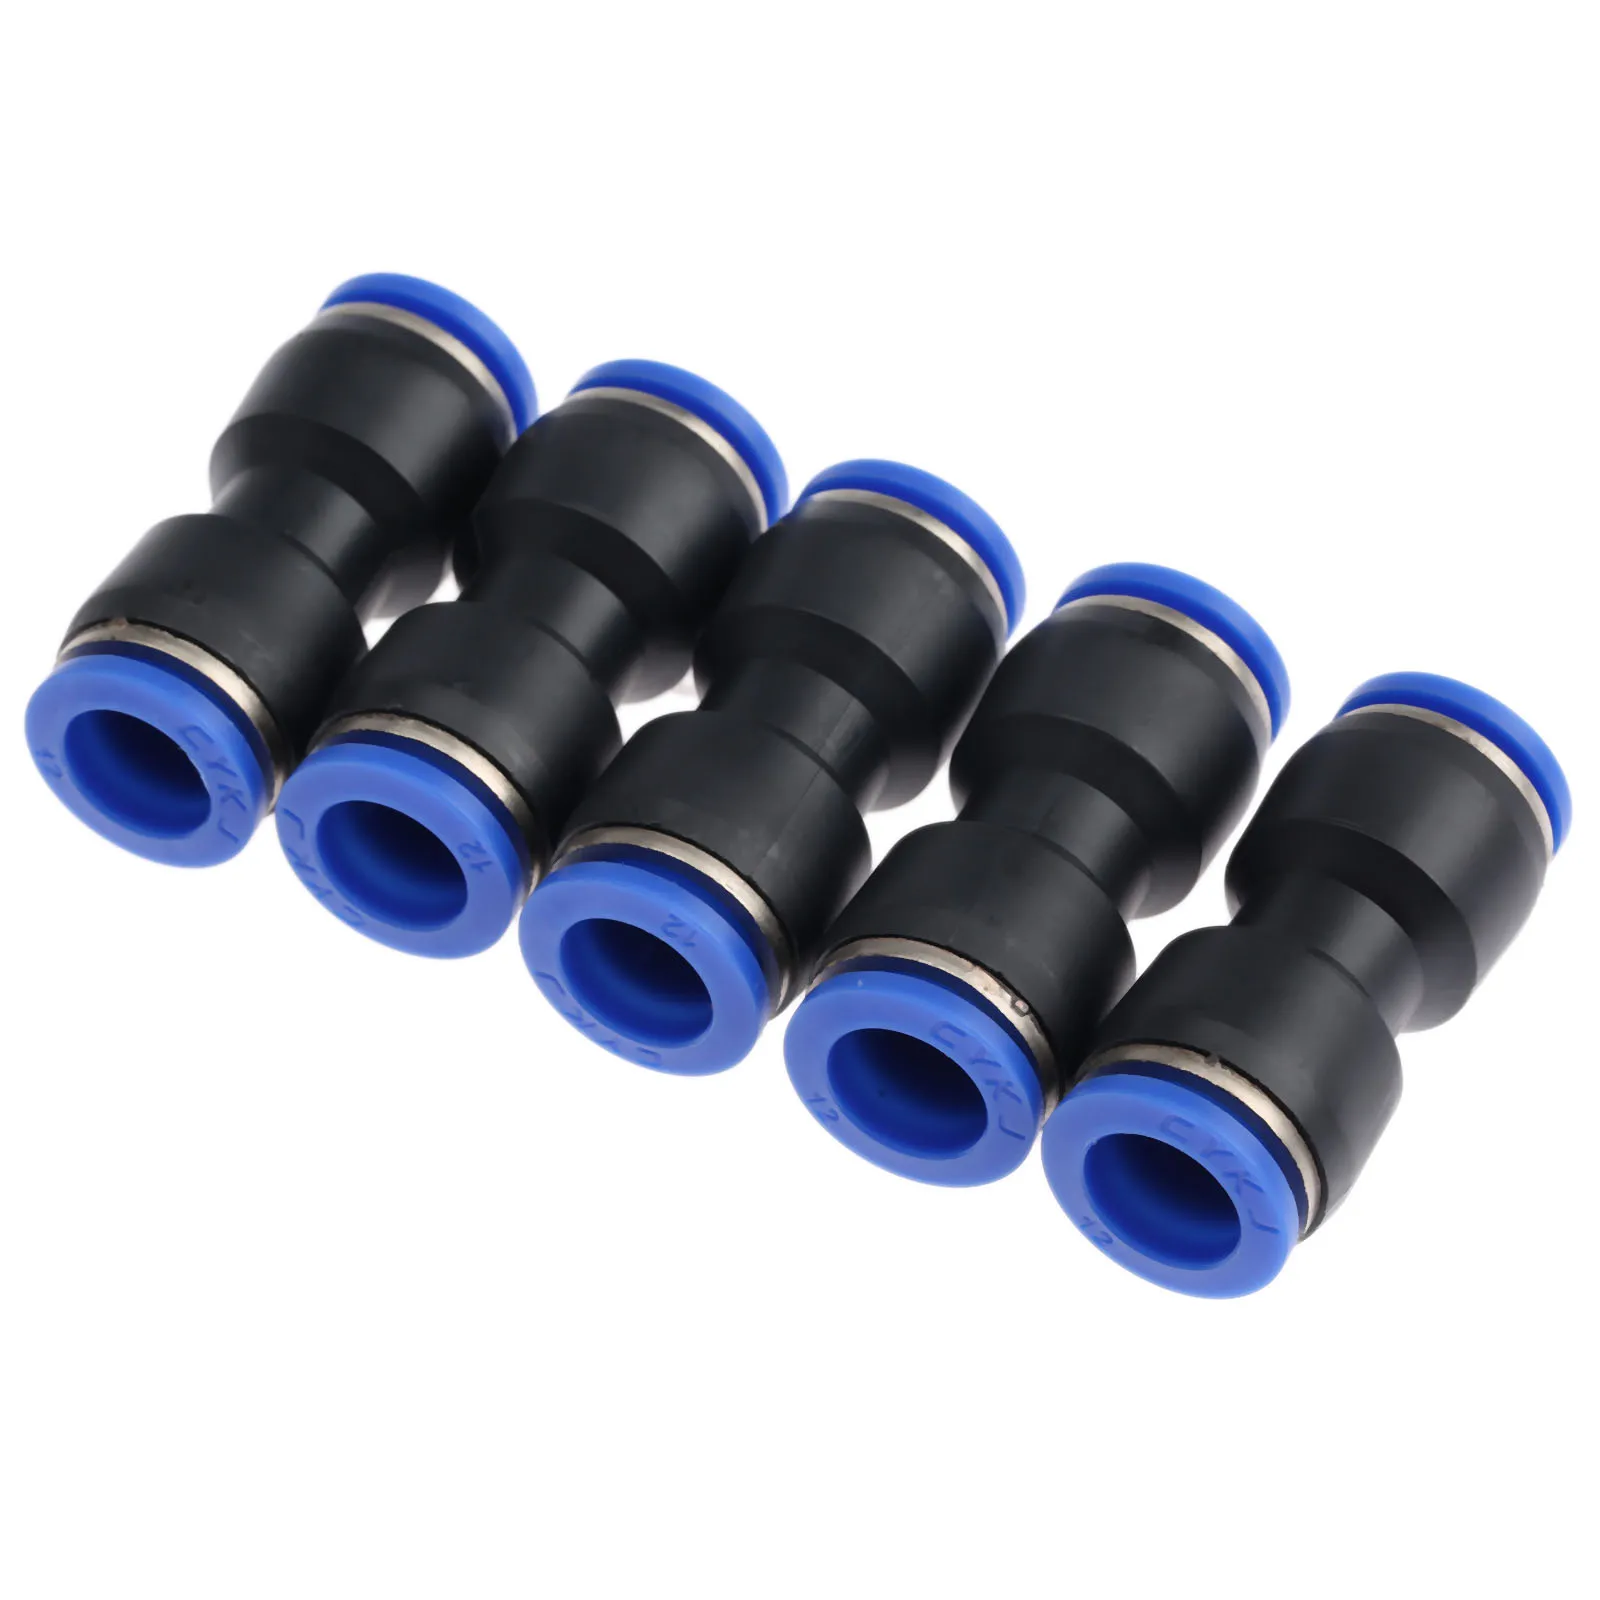 1pc/5pcs 4mm-16mm Pneumatic Straight Union Connectors Push In Air Fitting 